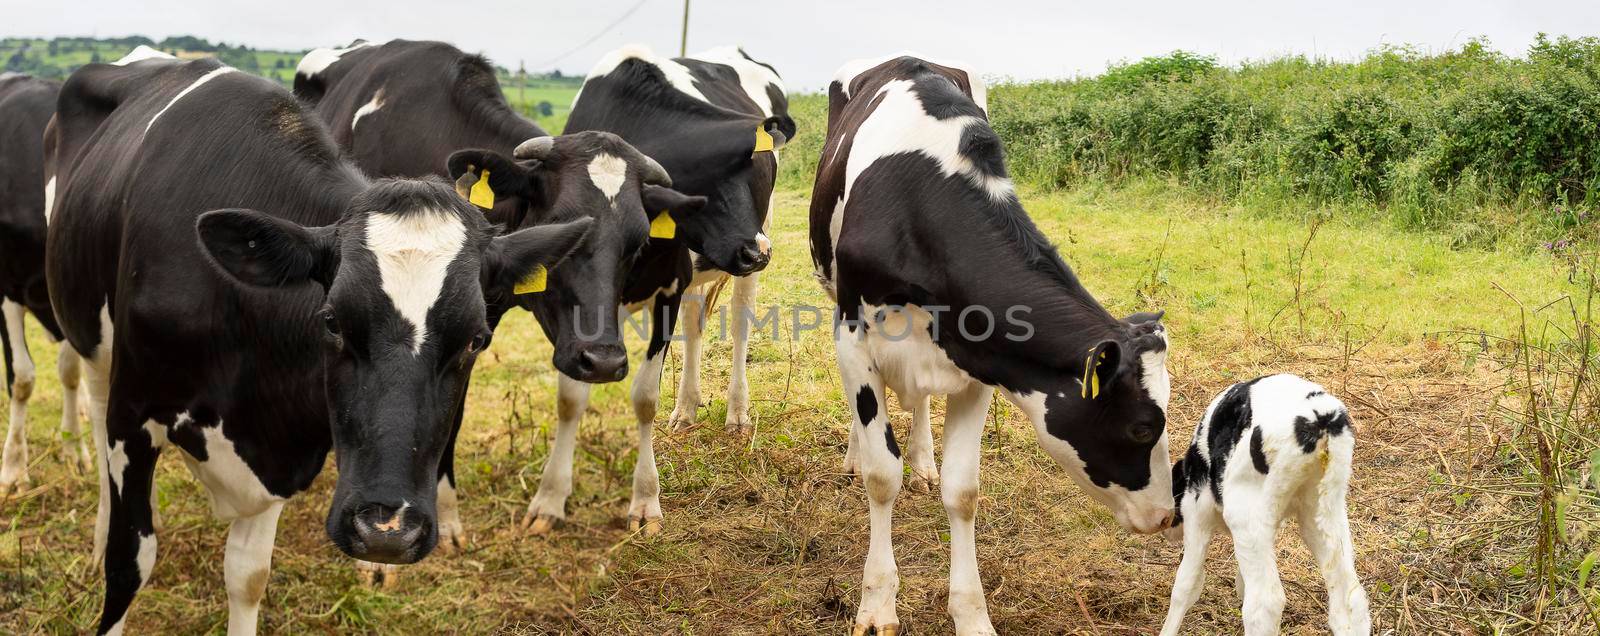 Cows with a claf in a meadow in the countryside England by LeoniekvanderVliet